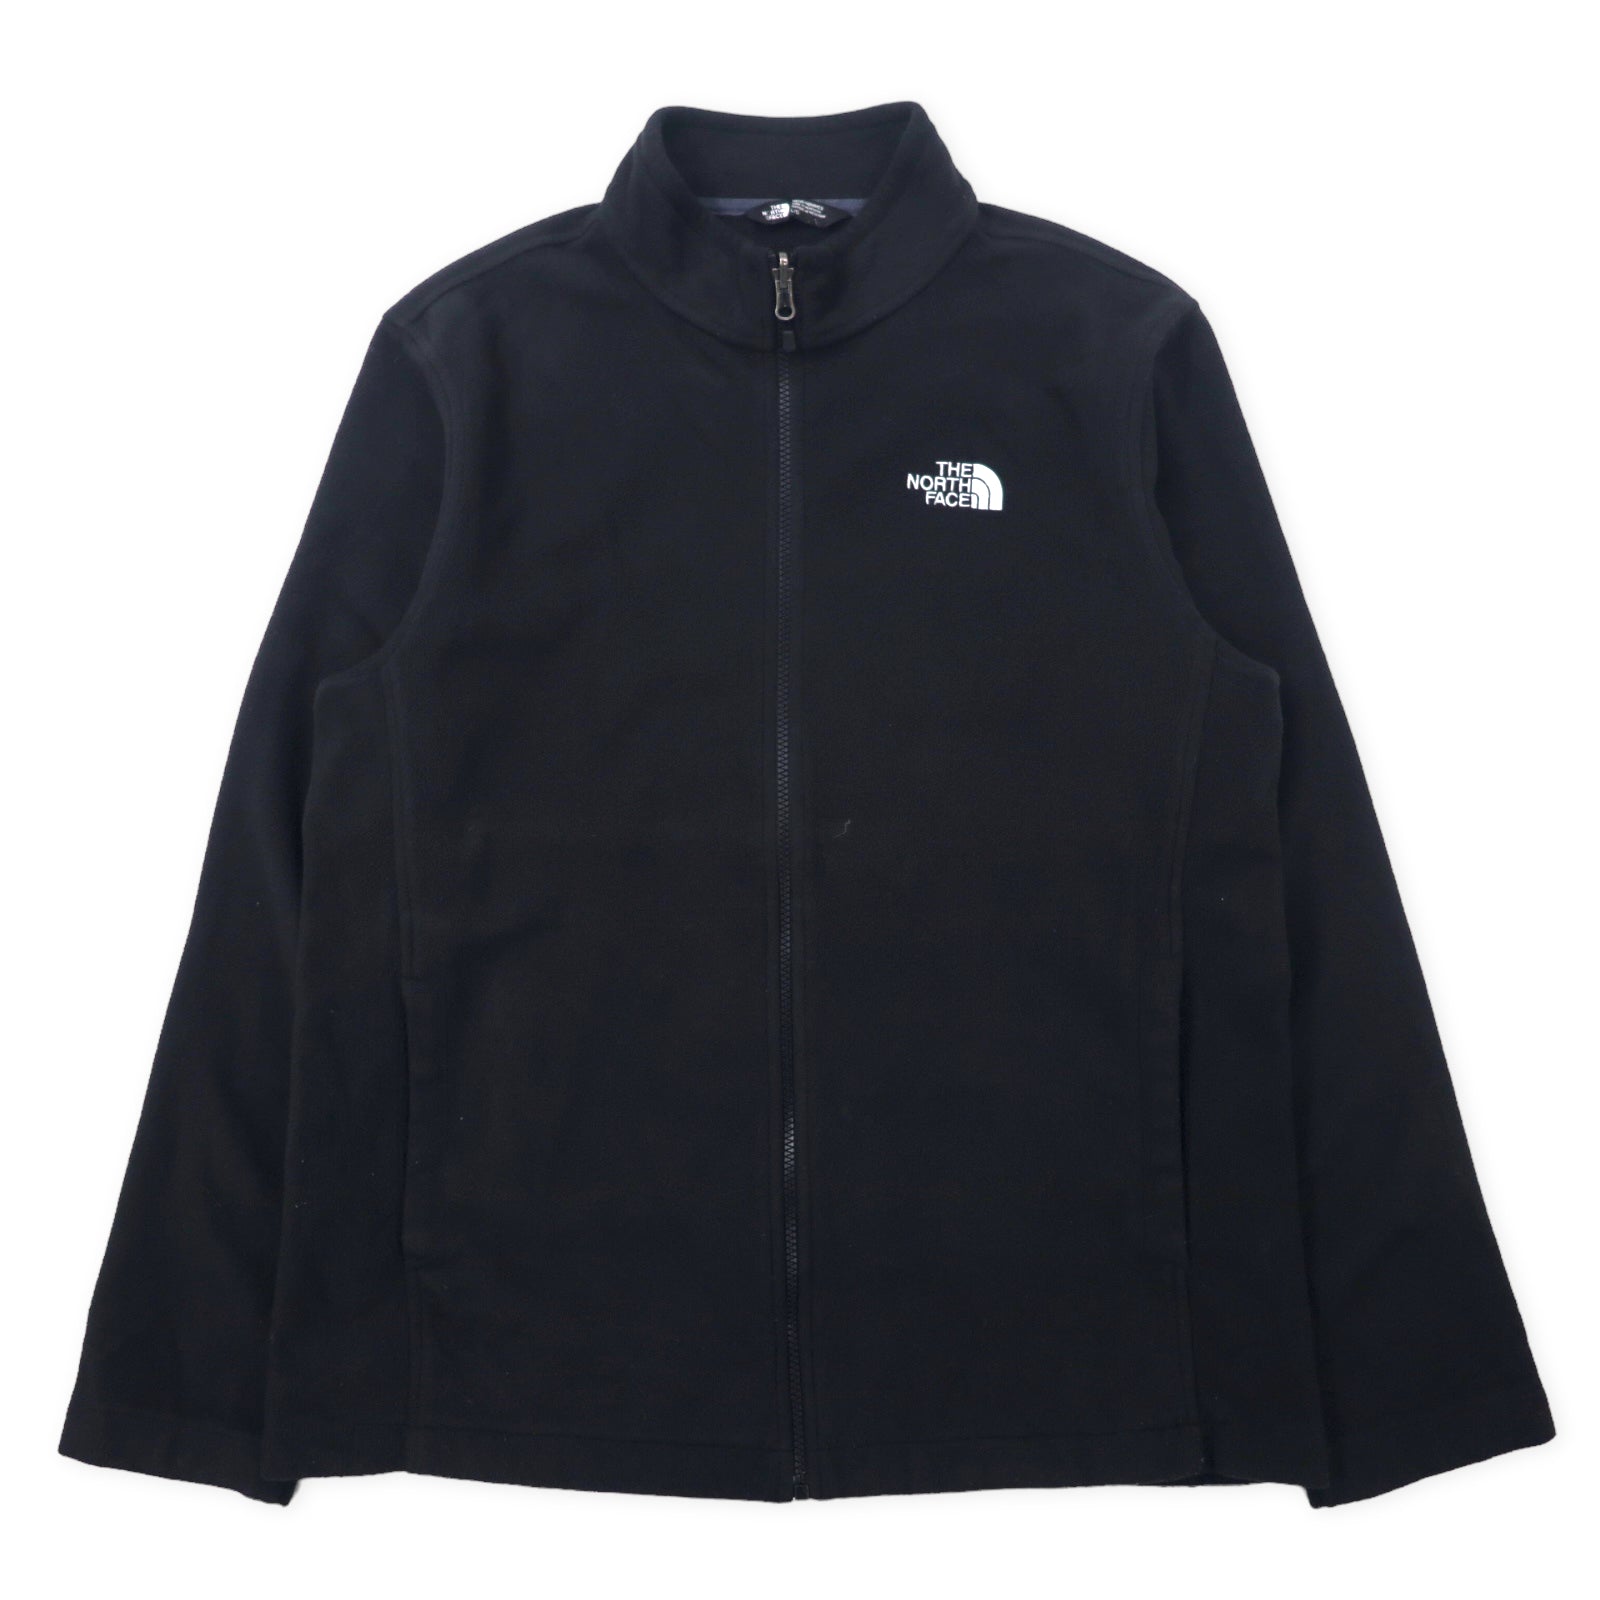 THE NORTH FACE Full Zip FLEECE Jacket L Black polyester logo embroidery ...